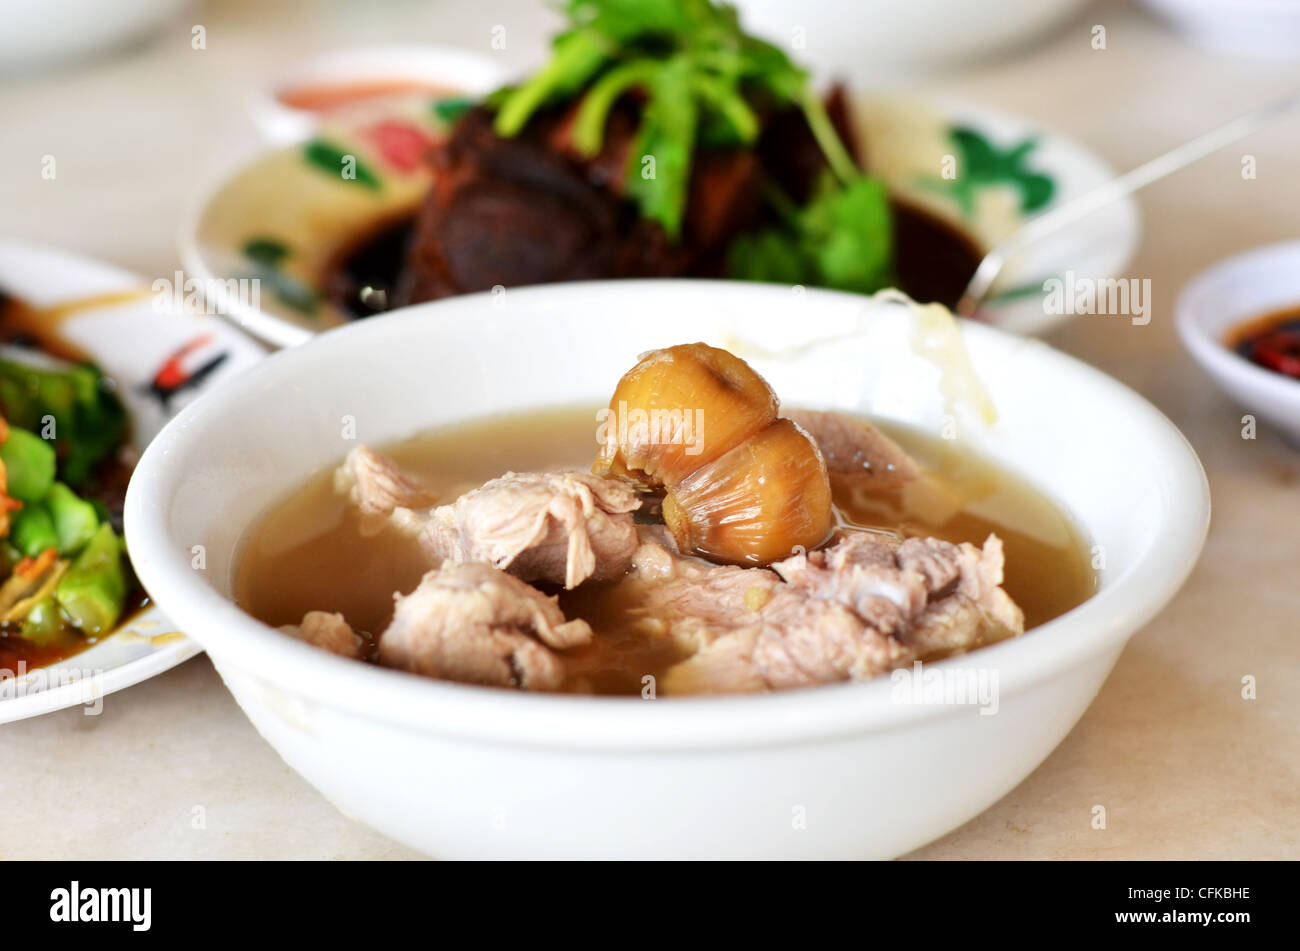 Malaysian stew of pork and herbal soup, spicy peppery soup (bak kut teh) Stock Photo